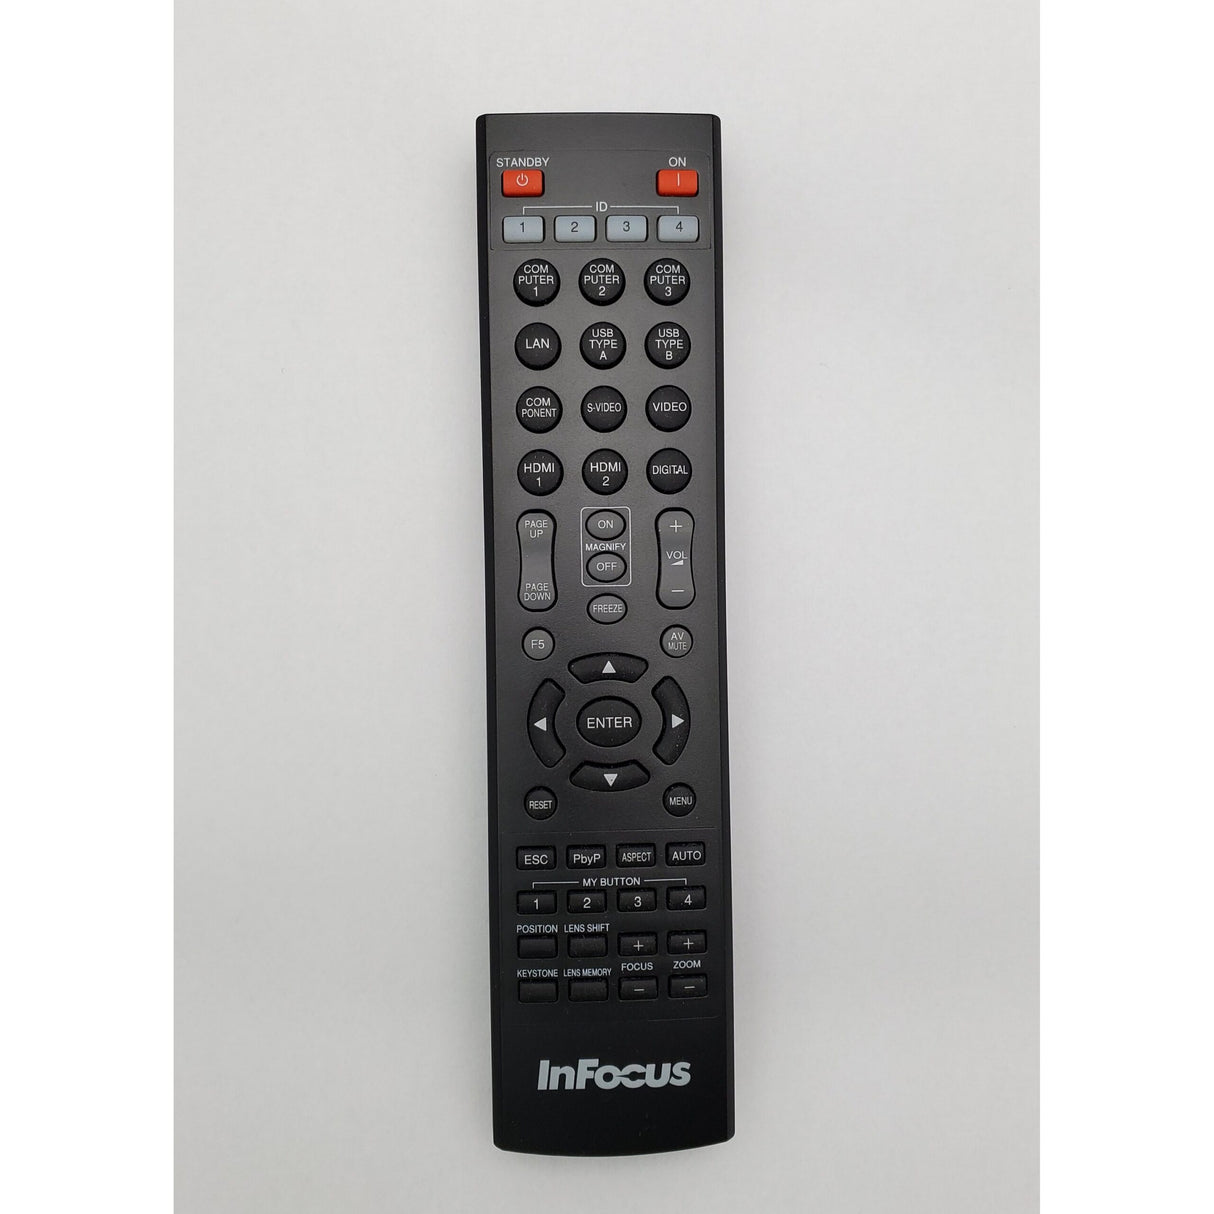 InFocus Replacement Remote Control for IN5134a